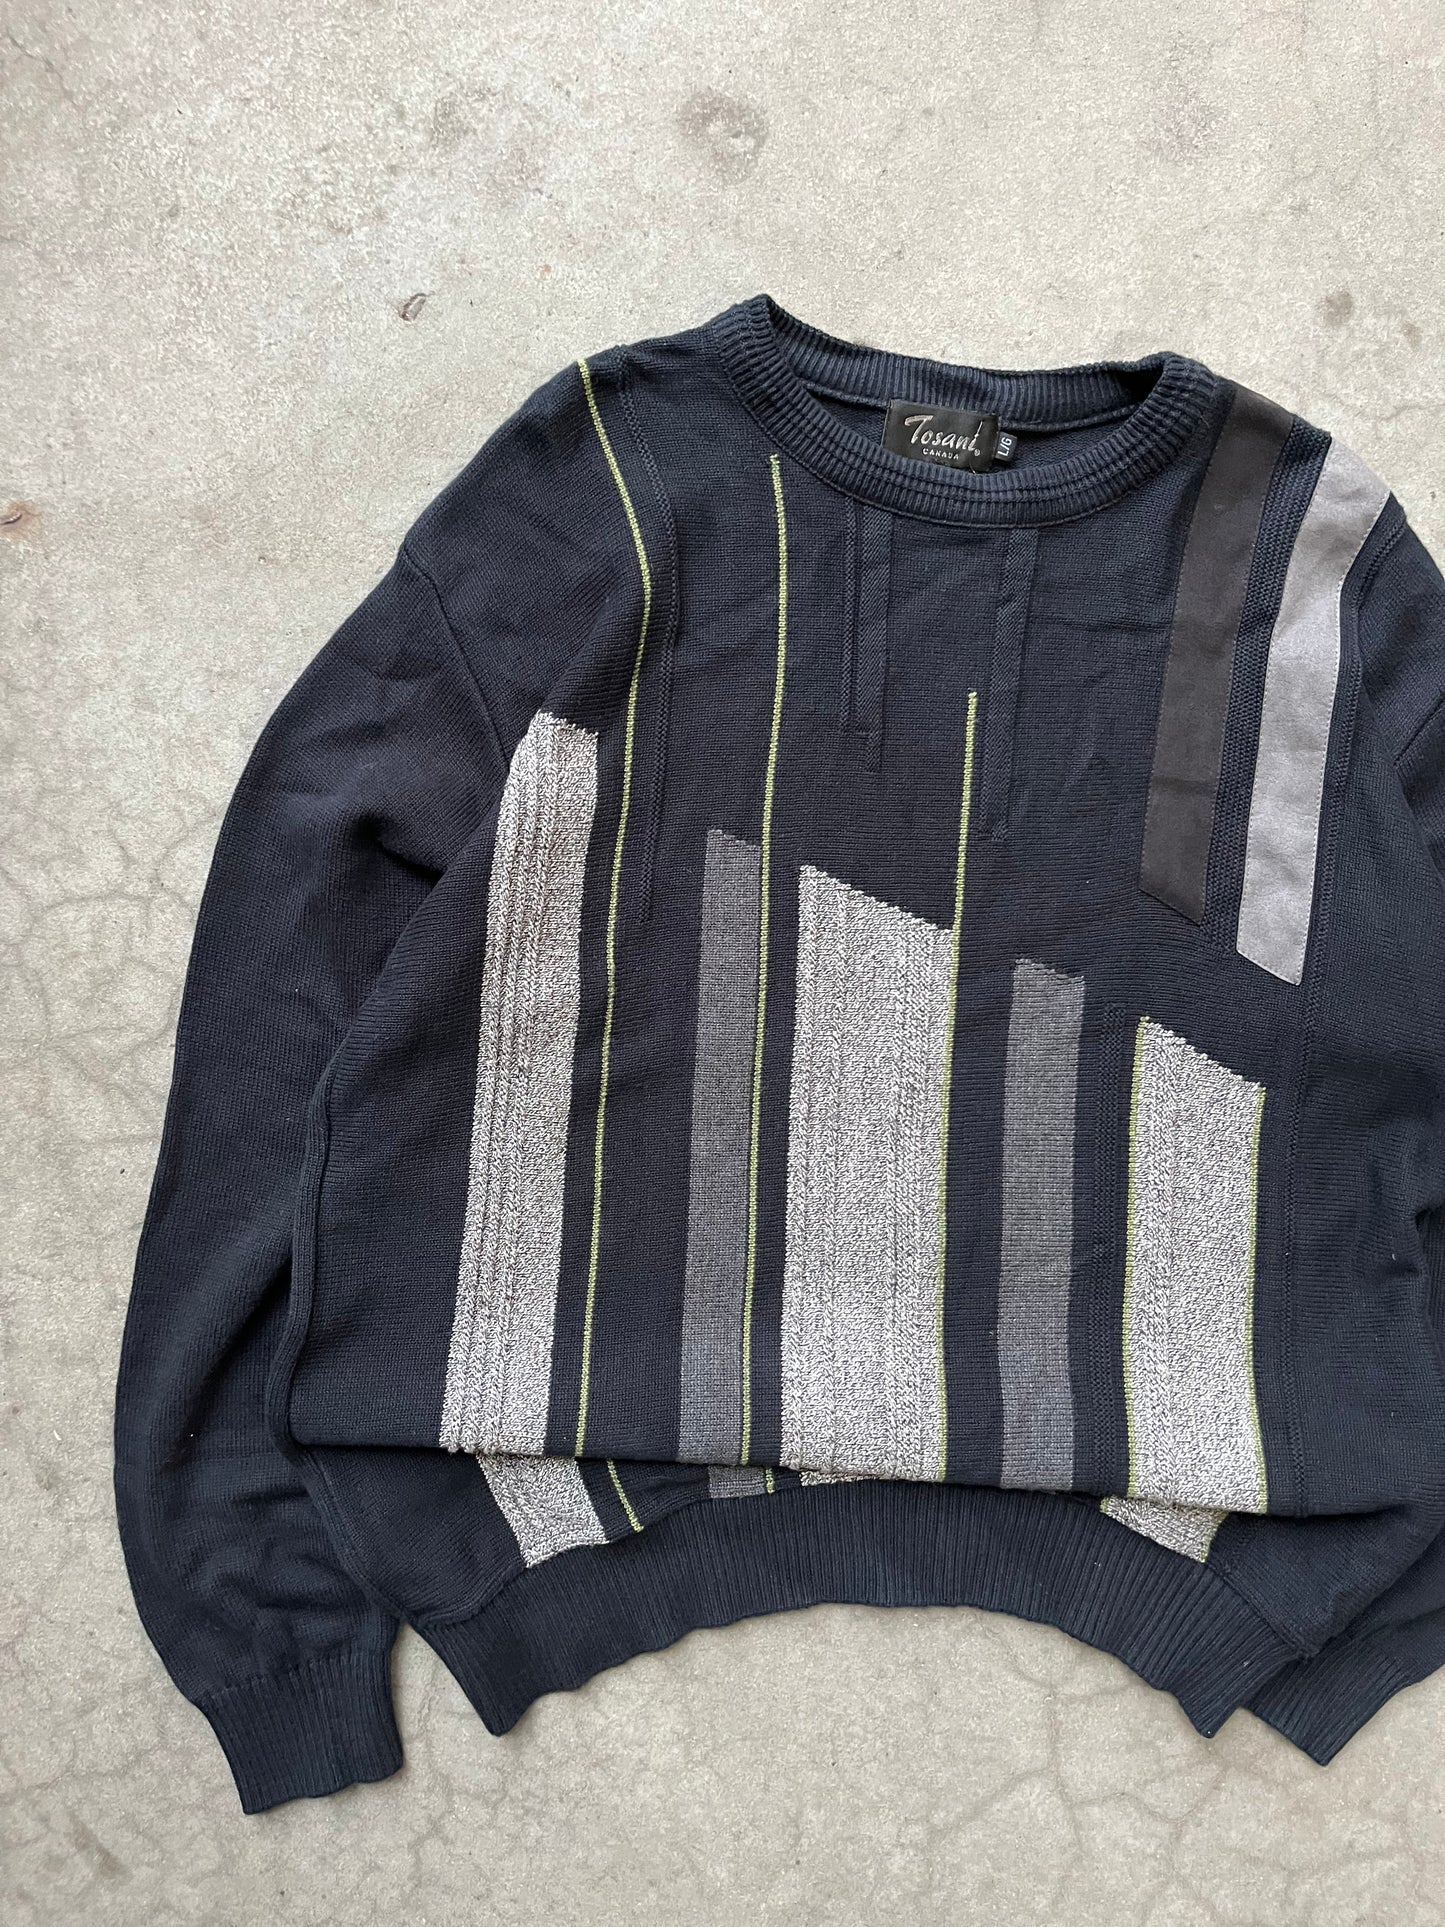 (L) 90s Tosani Abstract Knit